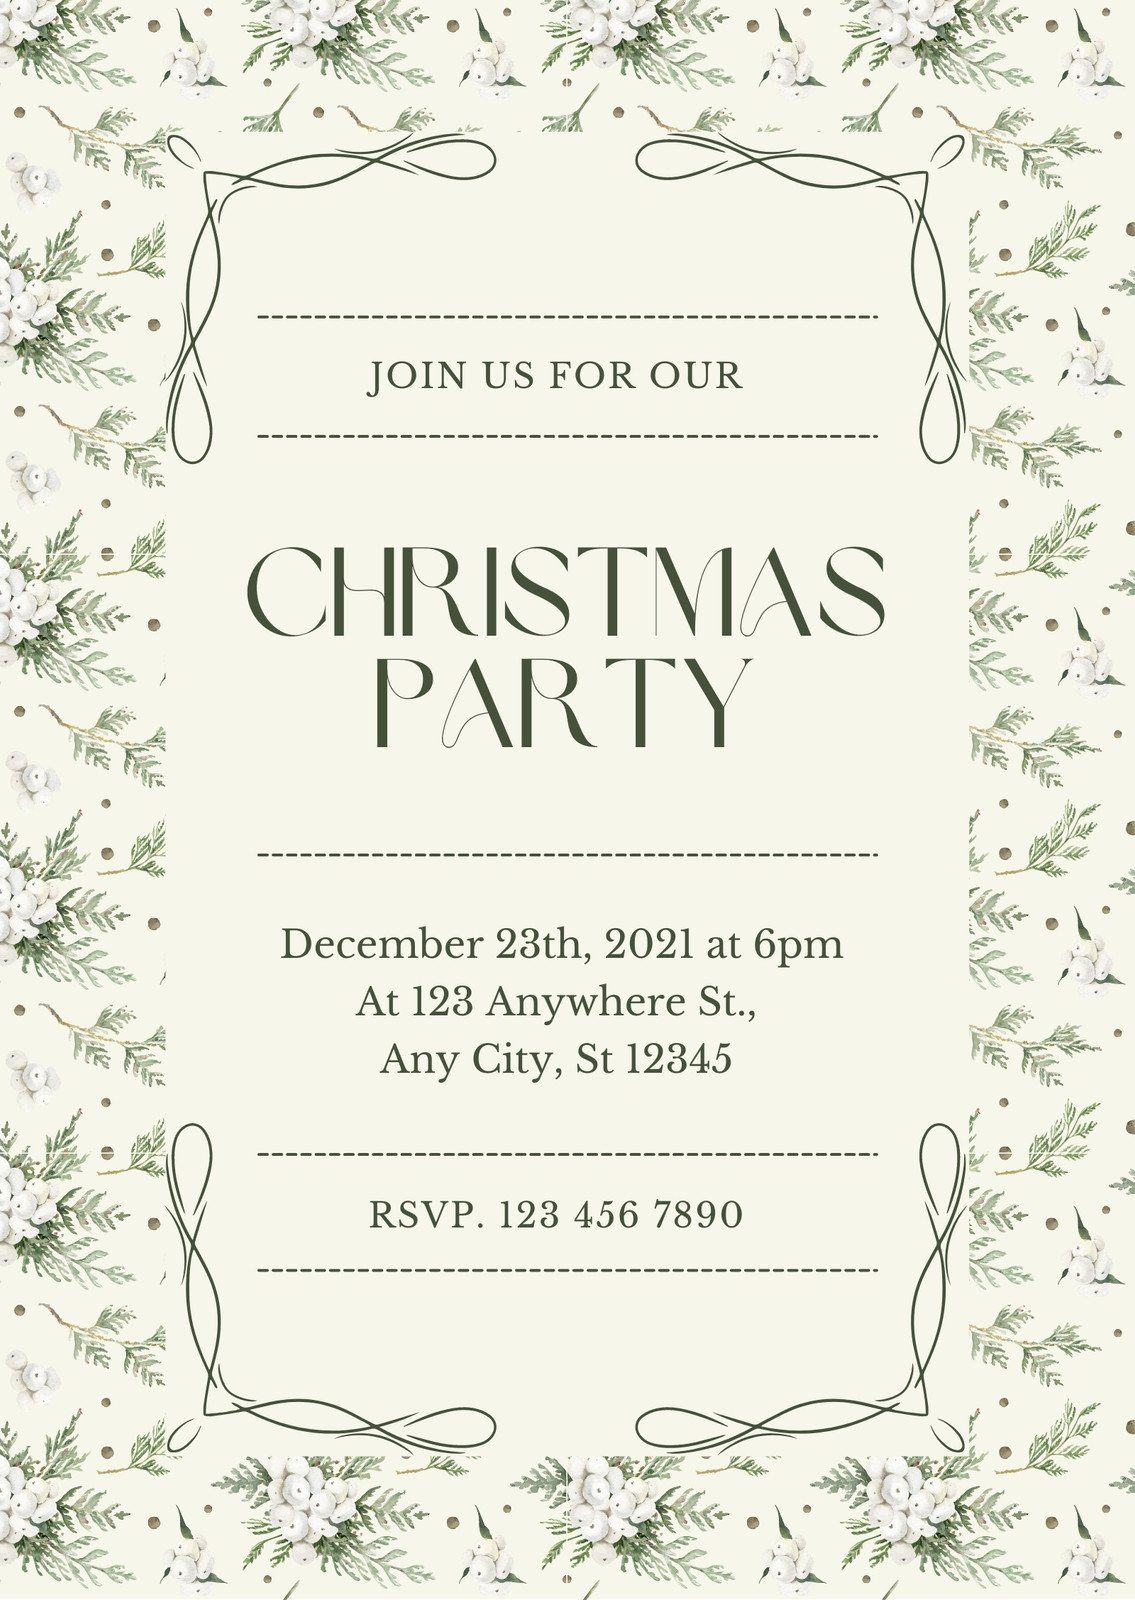 Floral Watercolor Christmas Party Invitation